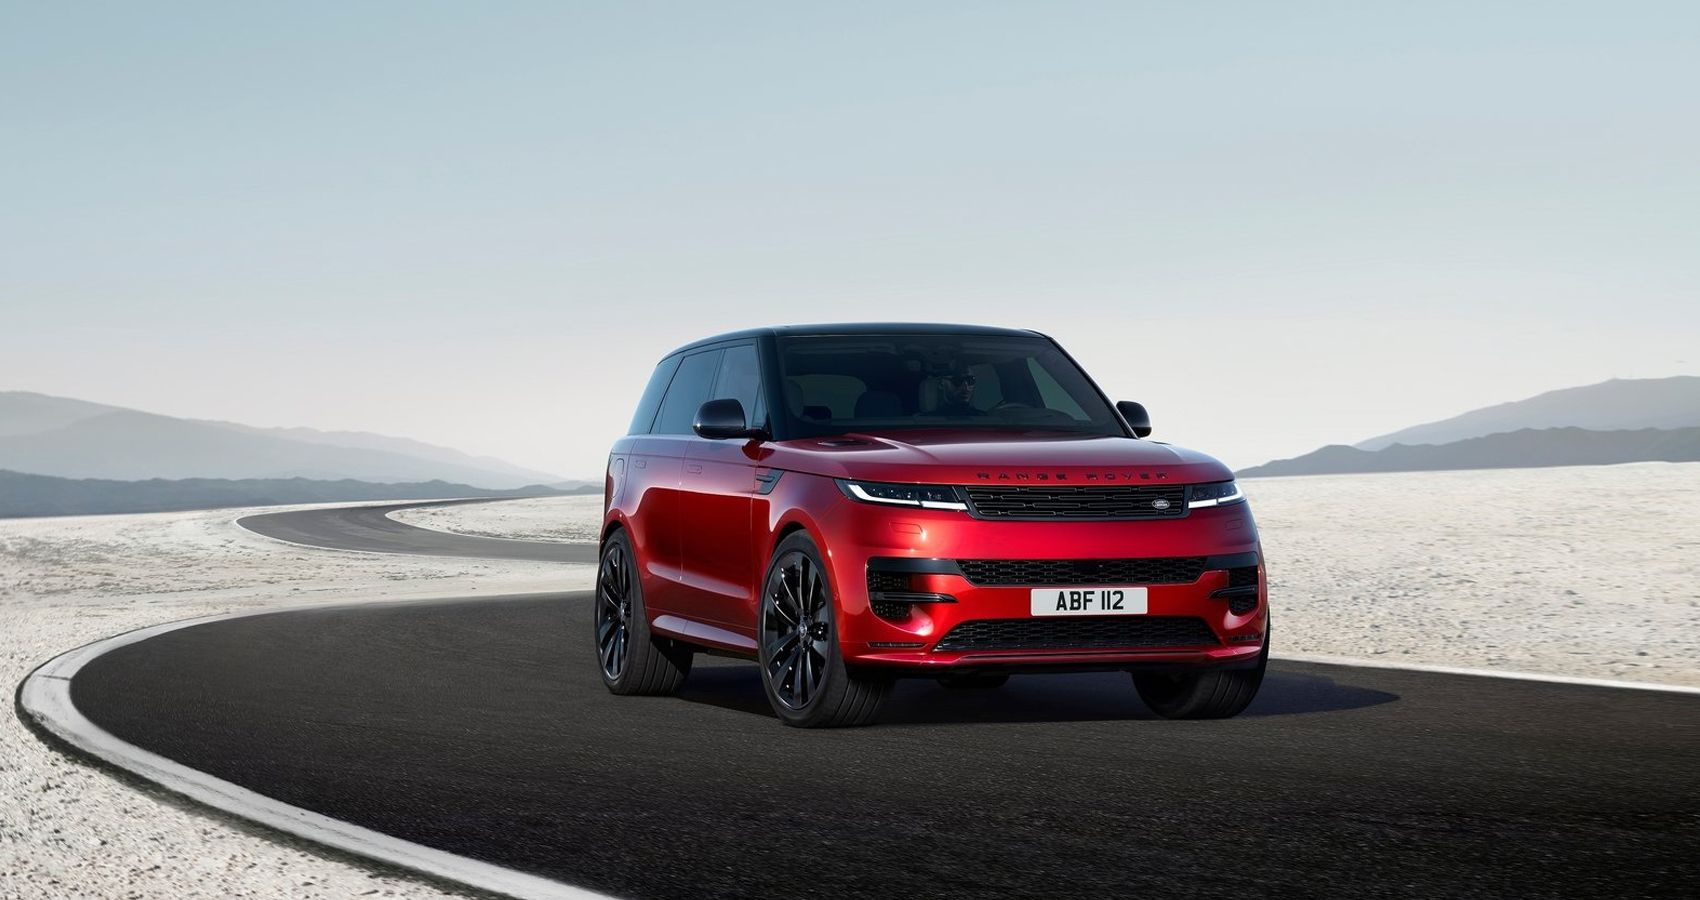 Front 3/4 view of a red 2023 Range Rover Sport, on a desert road 